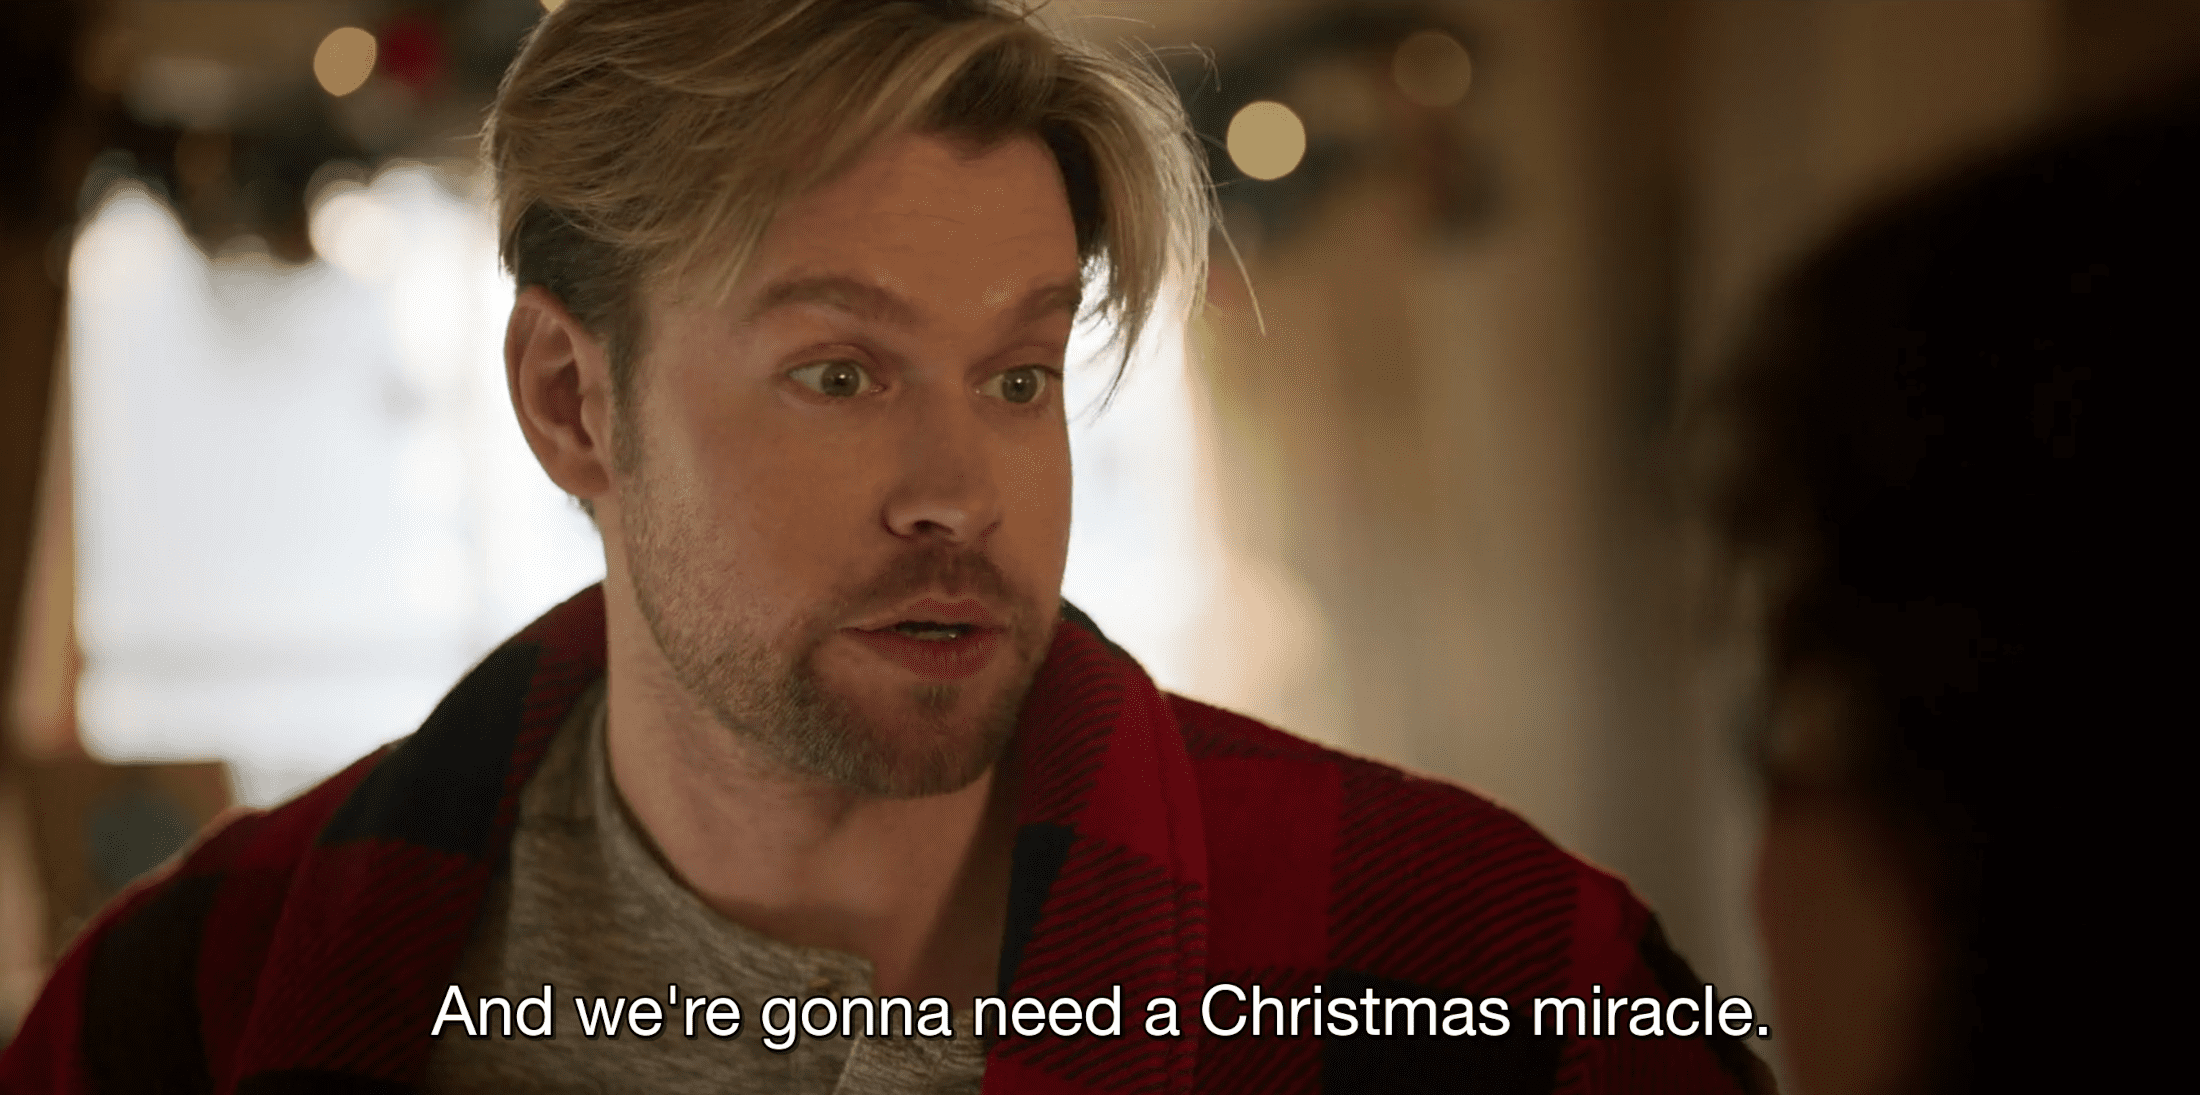 Jake saying "We're gonna need a Christmas miracle."